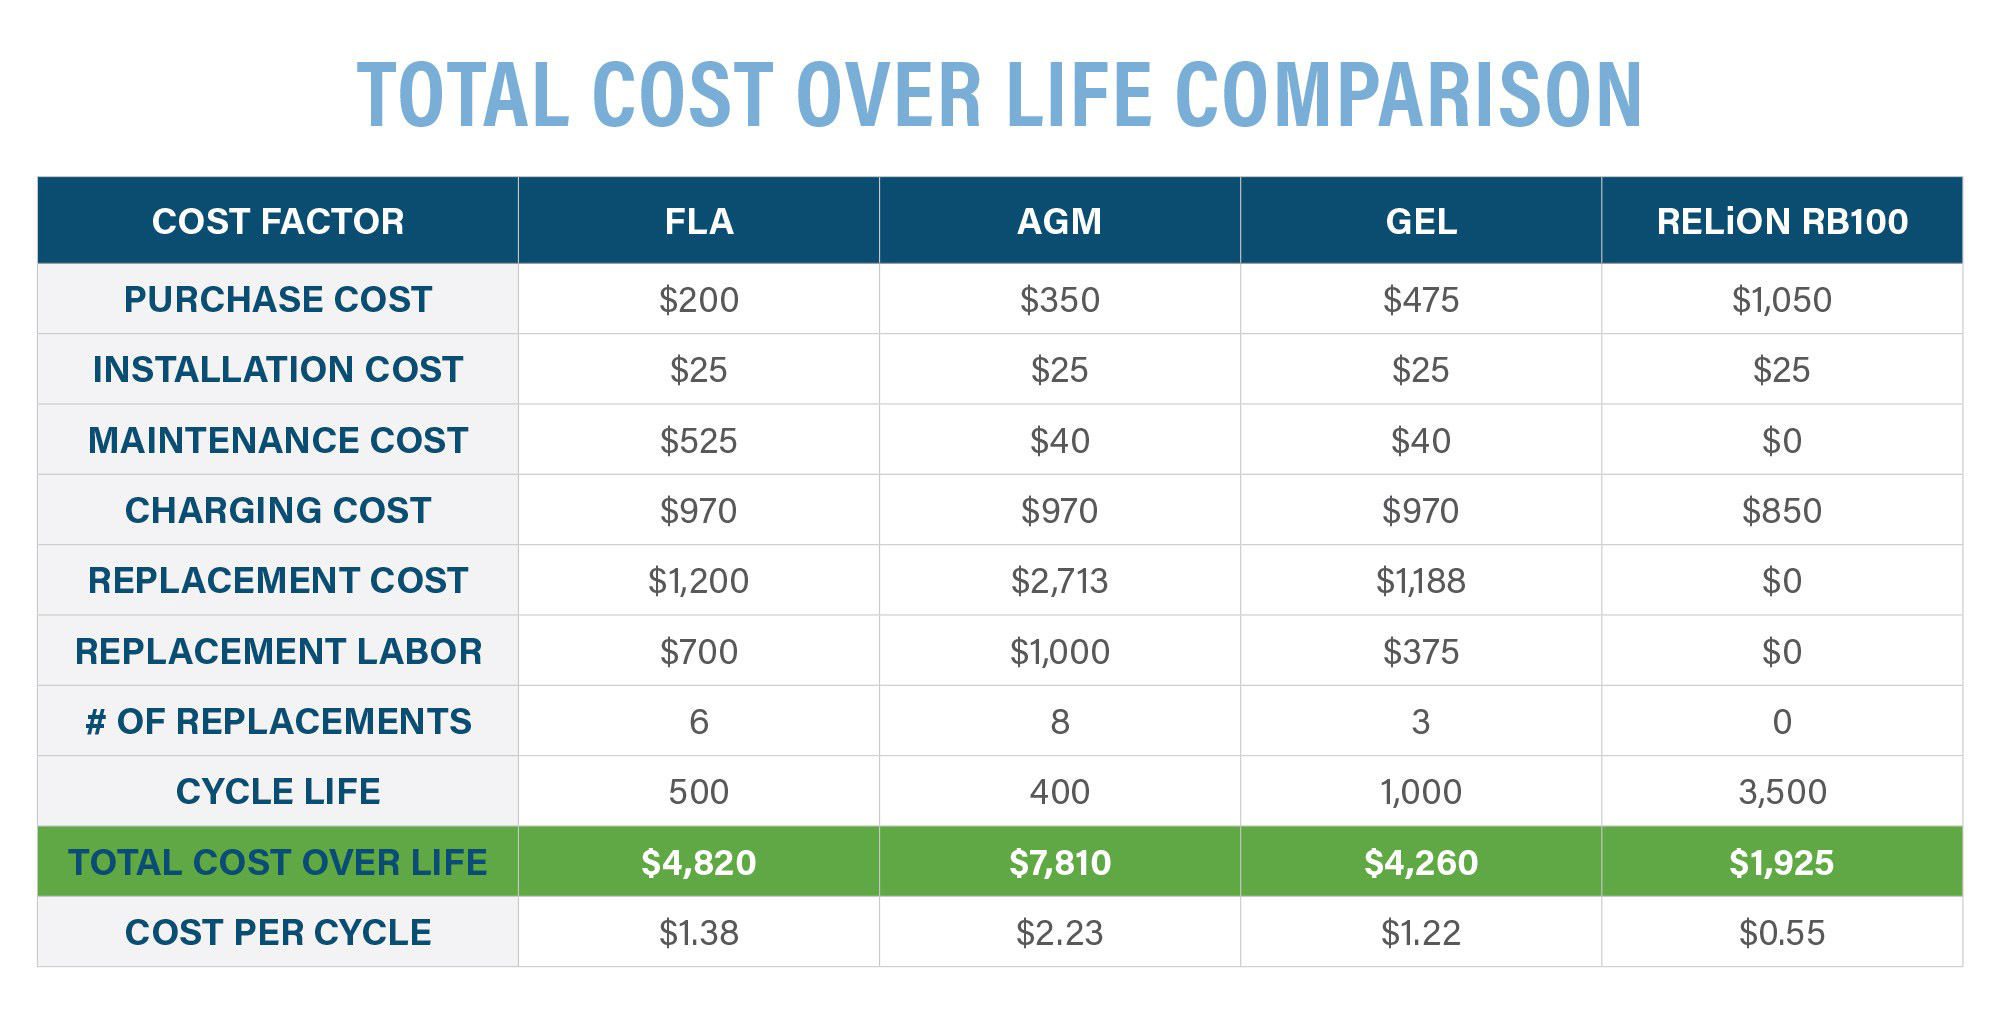 Total cost over life comparison chart